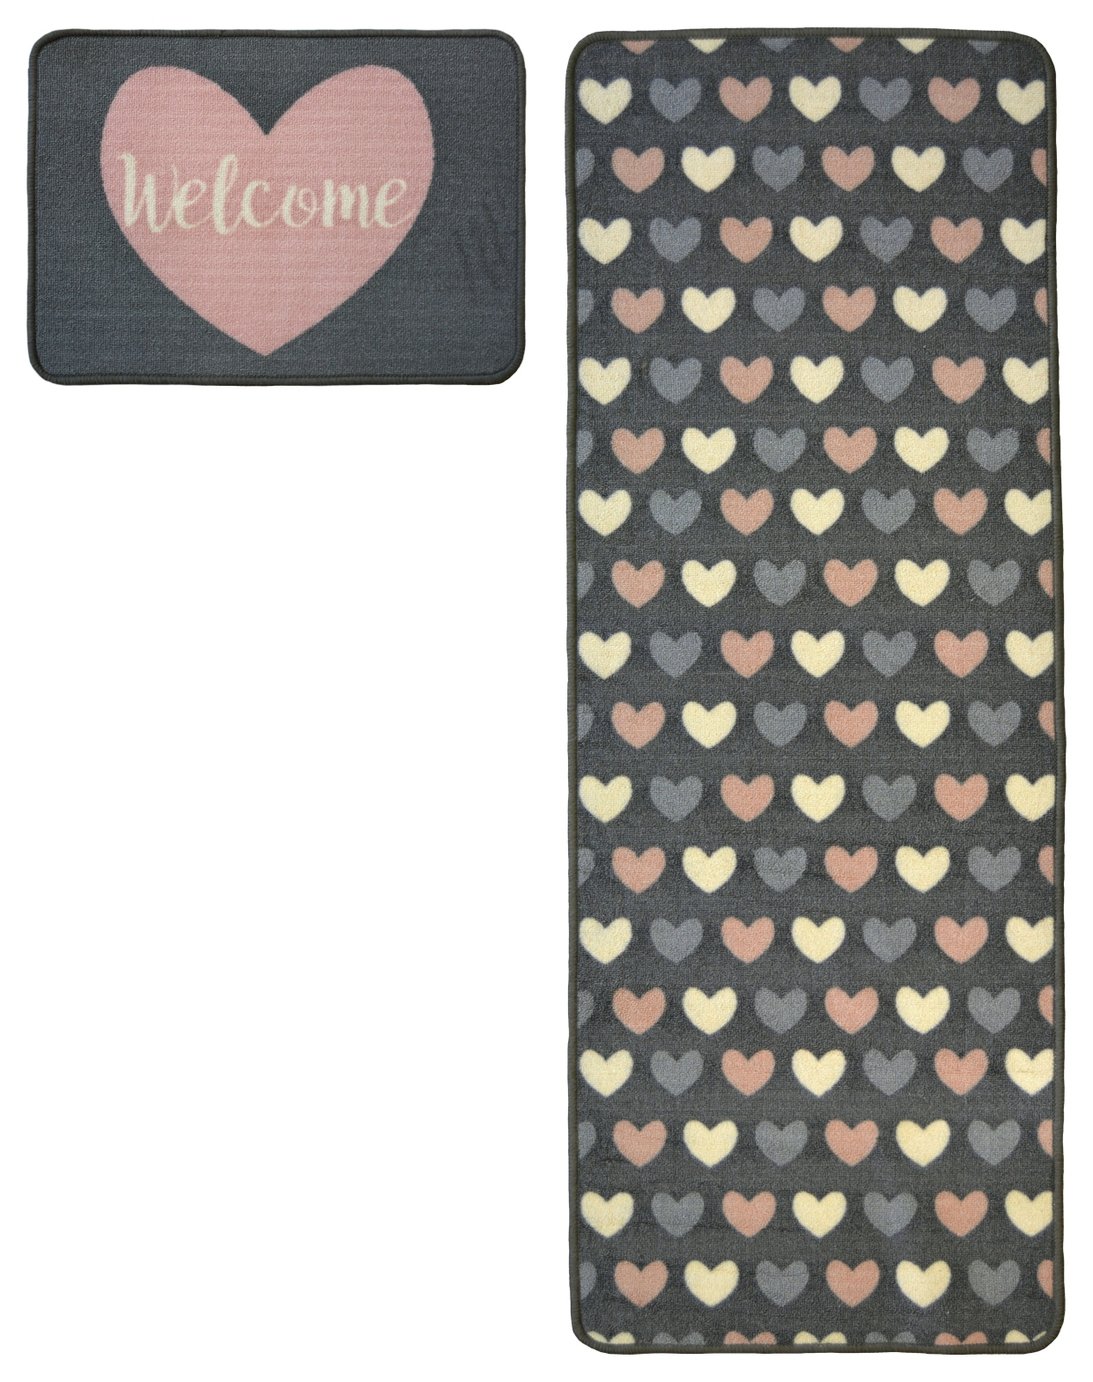 Homemaker Washable Hearts Mat and Runner - 57x230cm - Grey